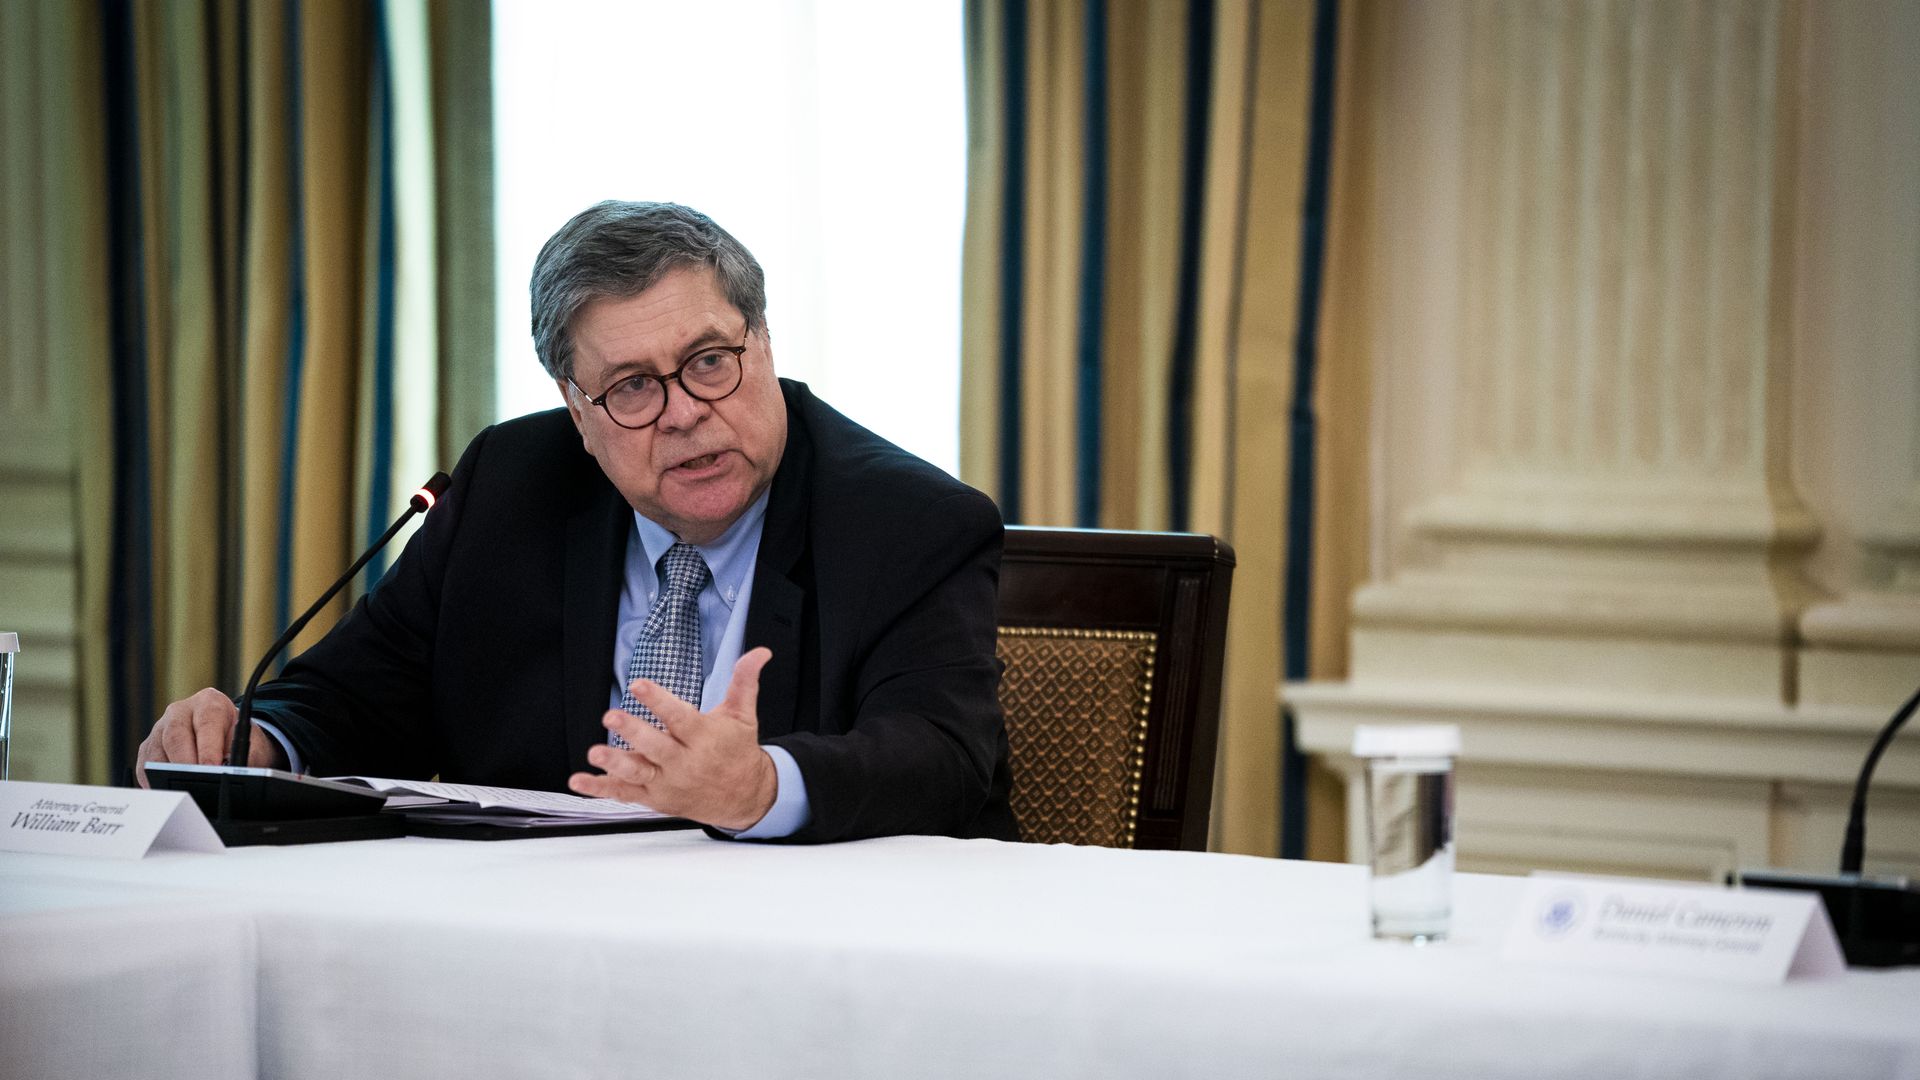 Attorney General Bill Barr speaks at a roundtable with law enforcement officials at the White House